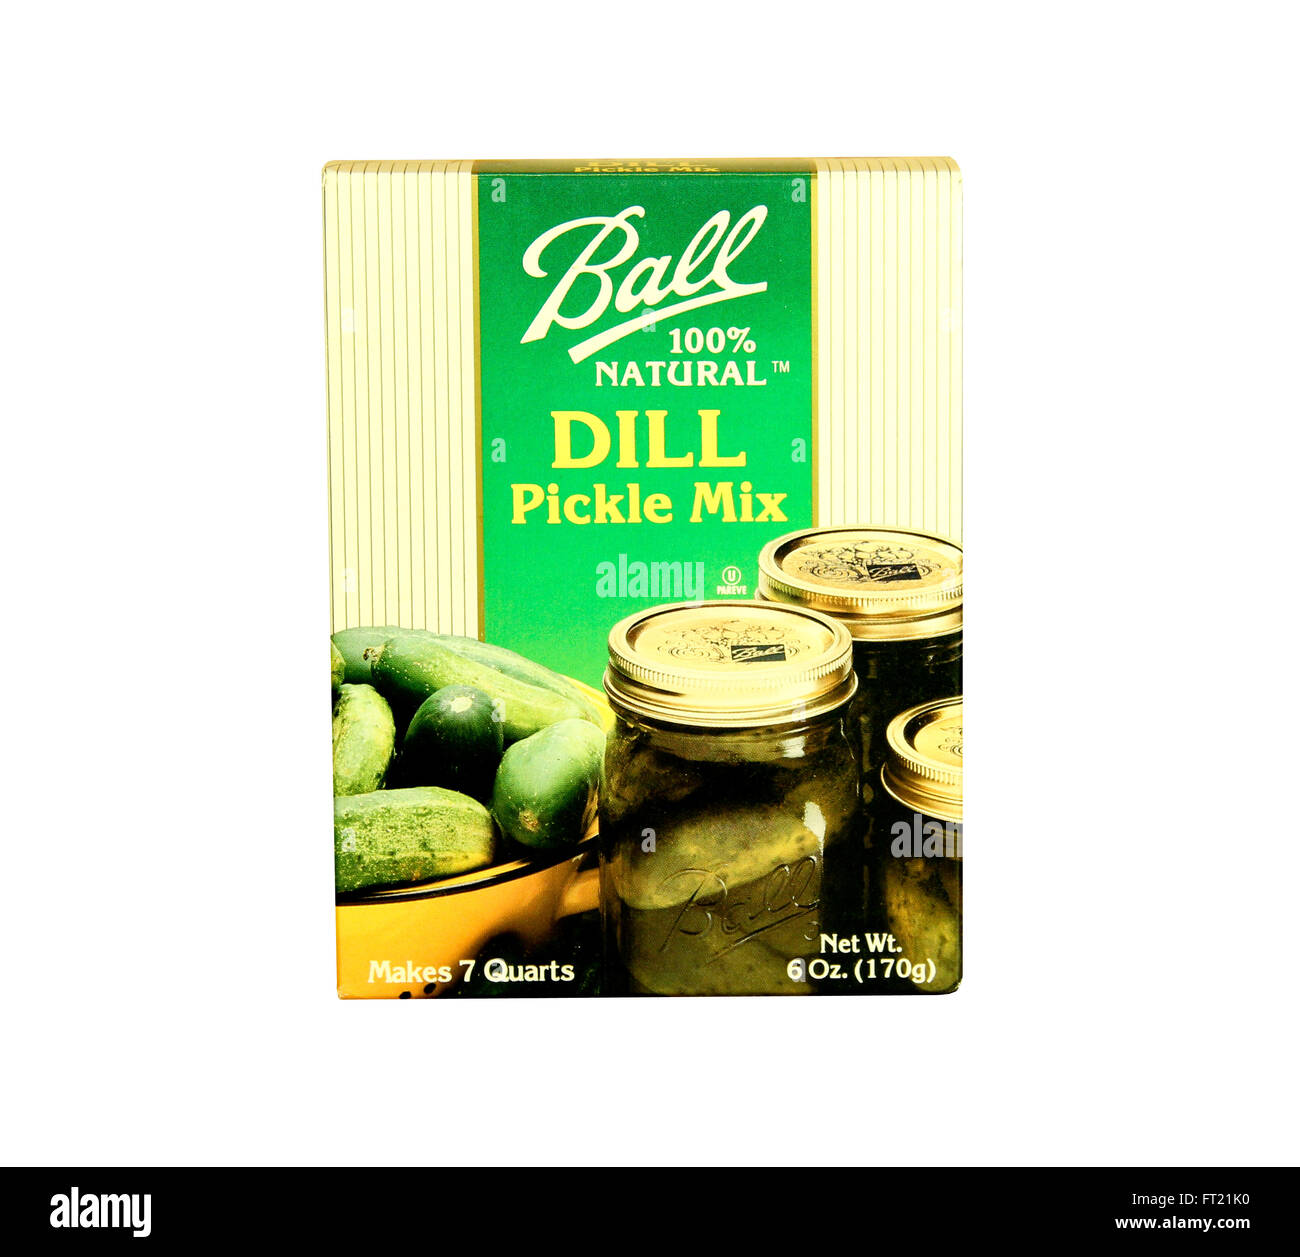 SPENCER , WISCONSIN- JANRUARY 30, 2014 : box of Ball Dill Pickle Mix. Ball is a canning supply company from America Stock Photo